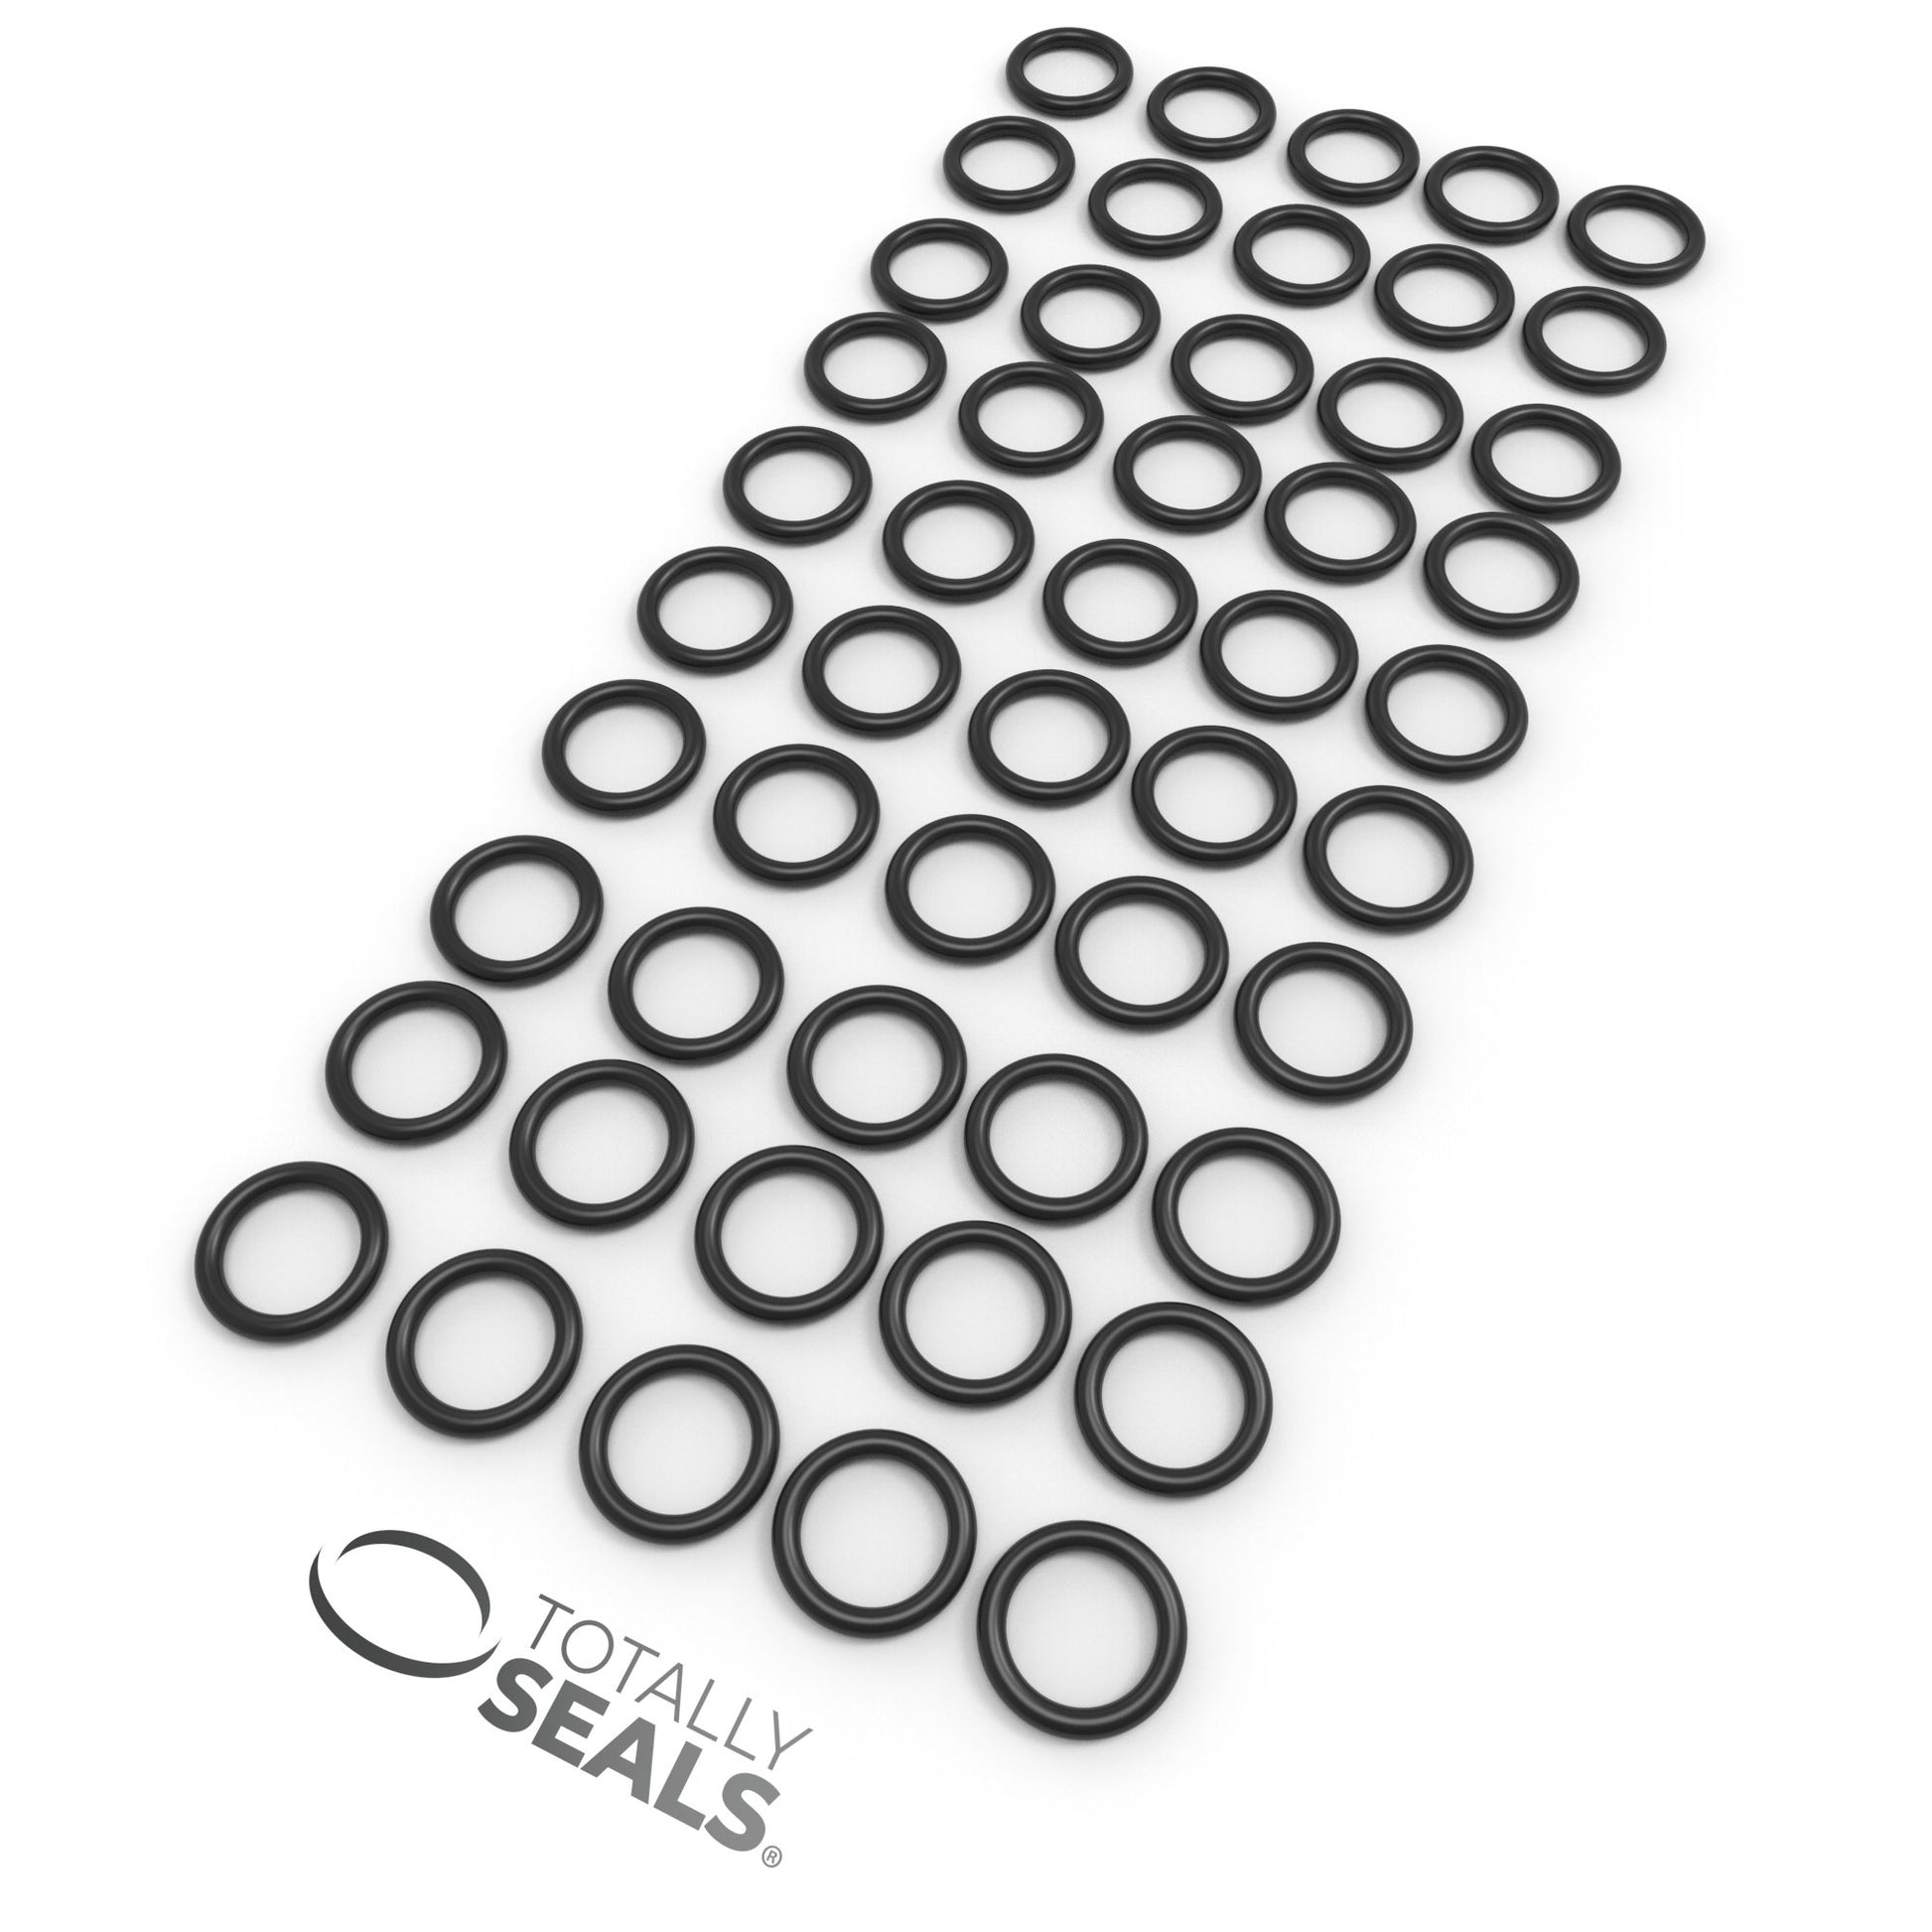 33mm x 2.5mm (38mm OD) Nitrile O-Rings - Totally Seals®